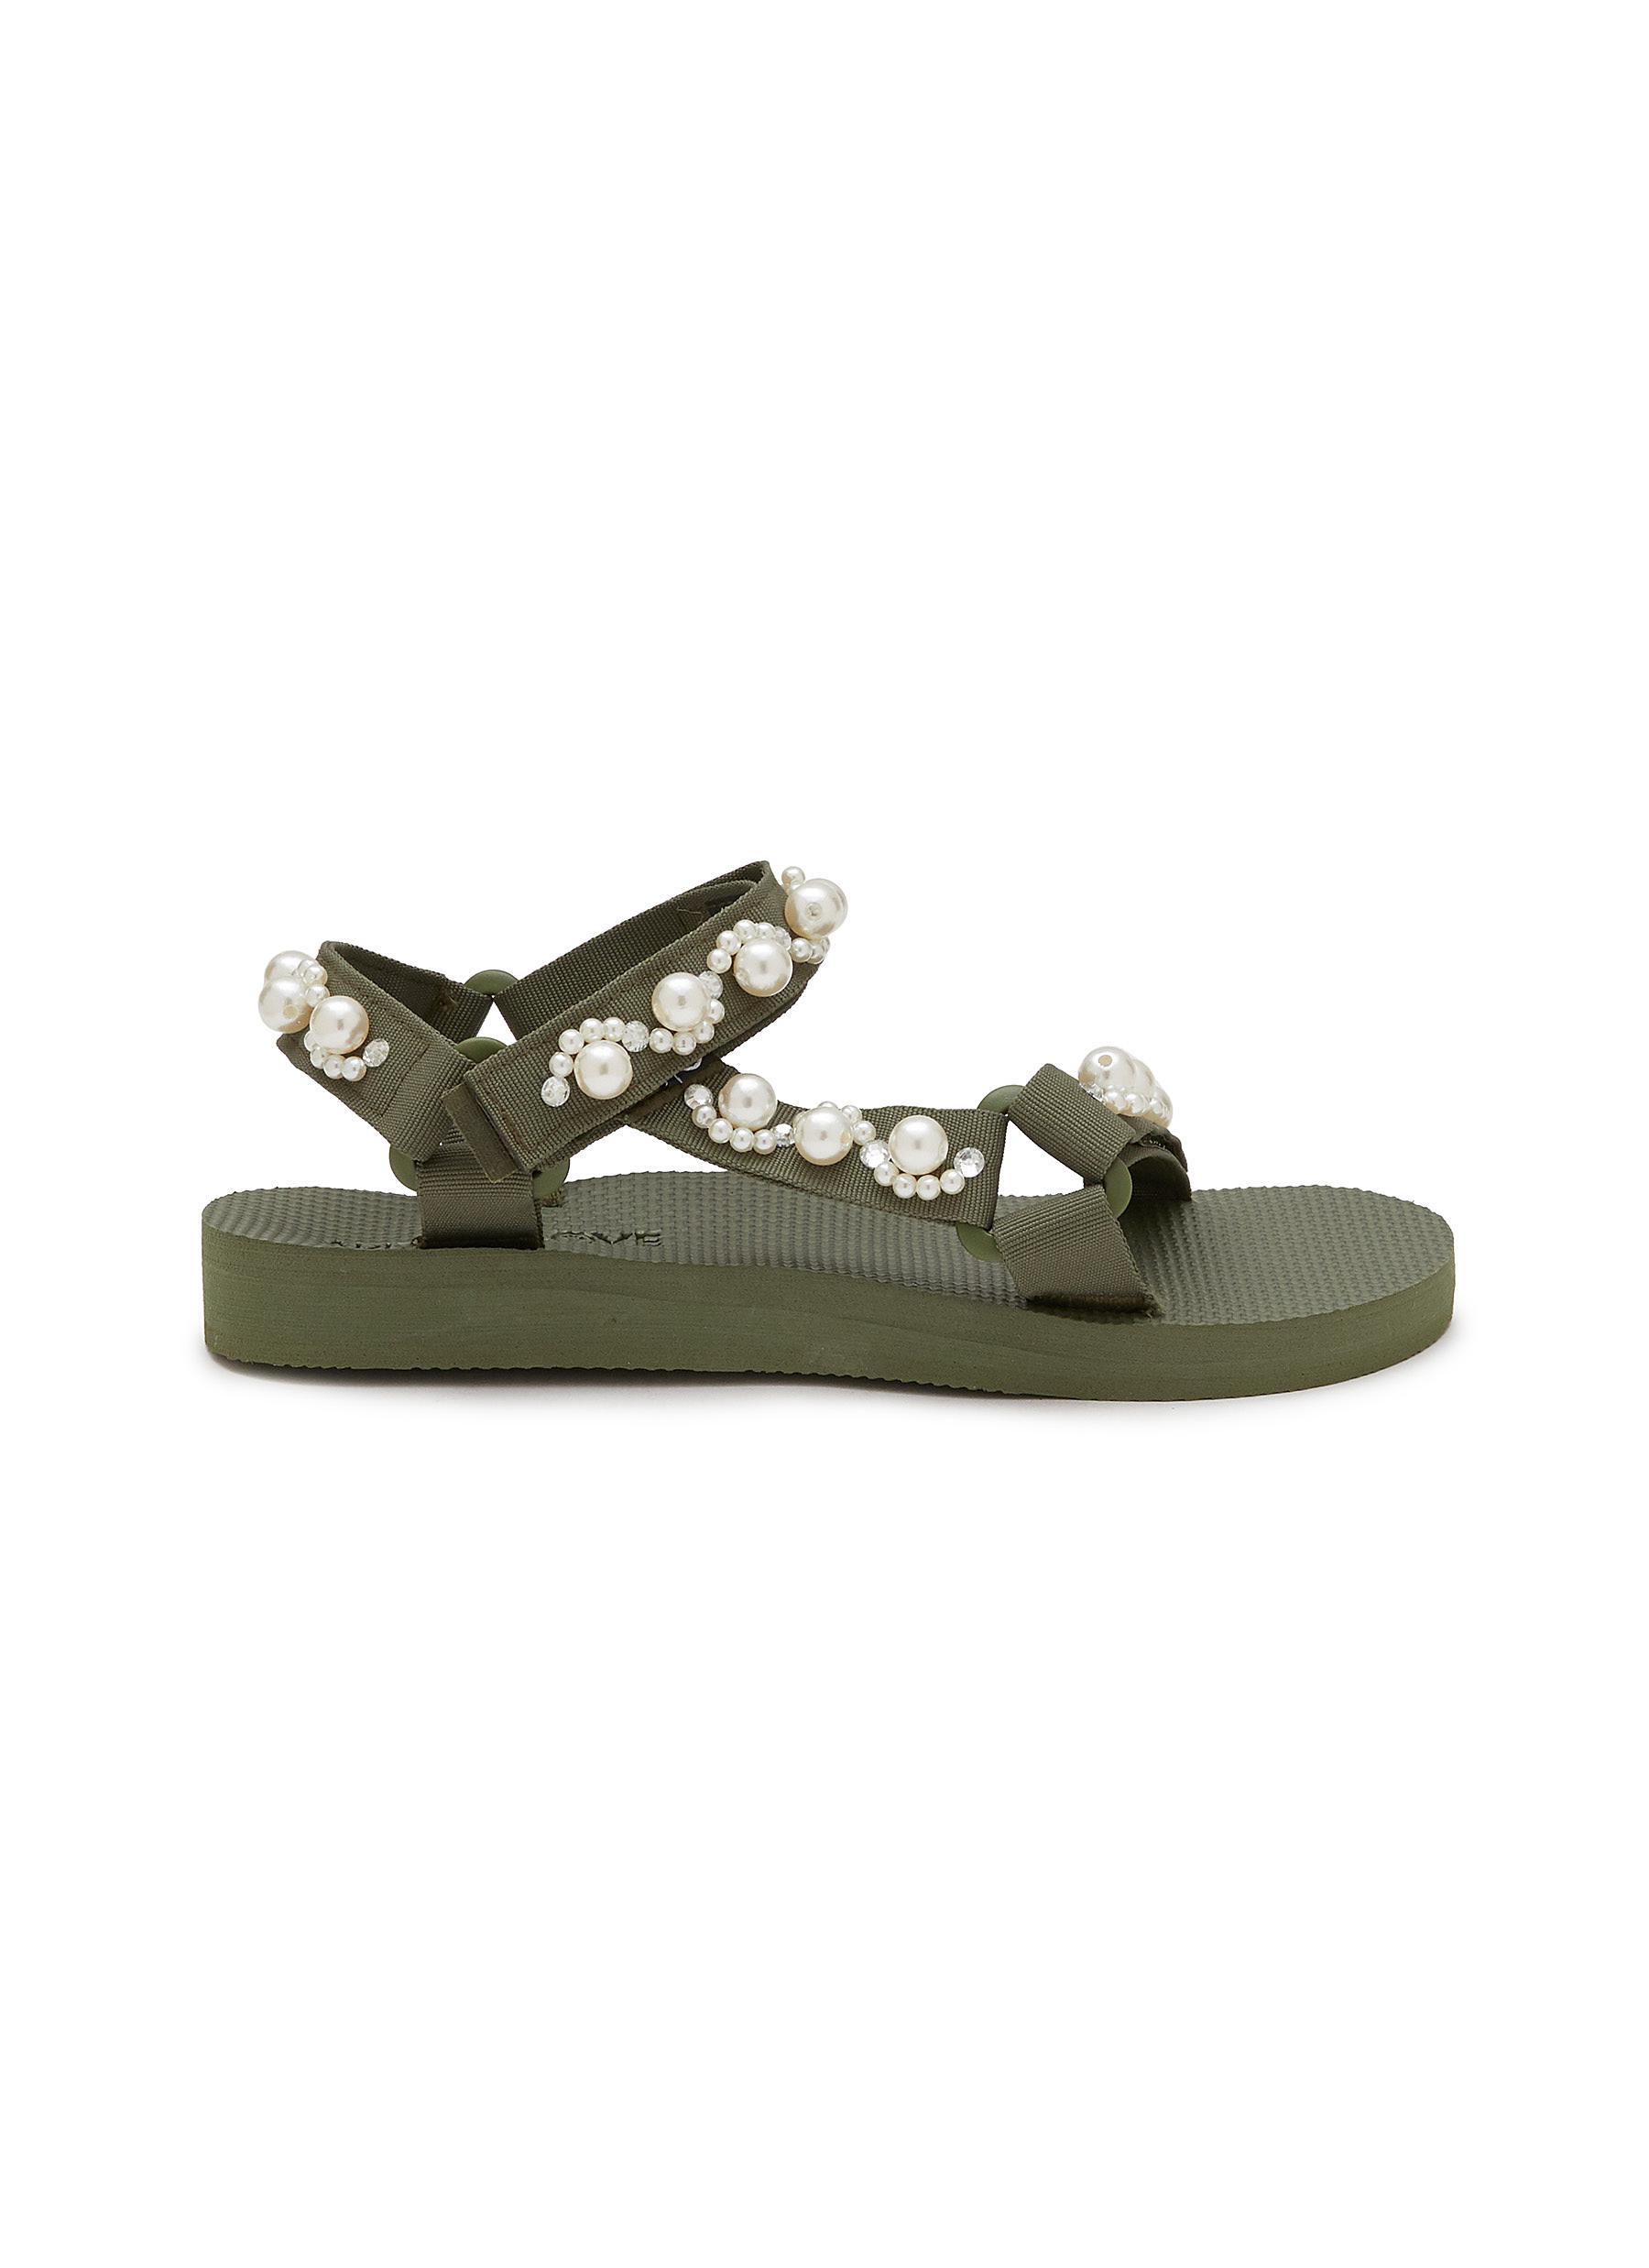 ‘Trekky Pearl' Pearl Embellished Double Band Sandals